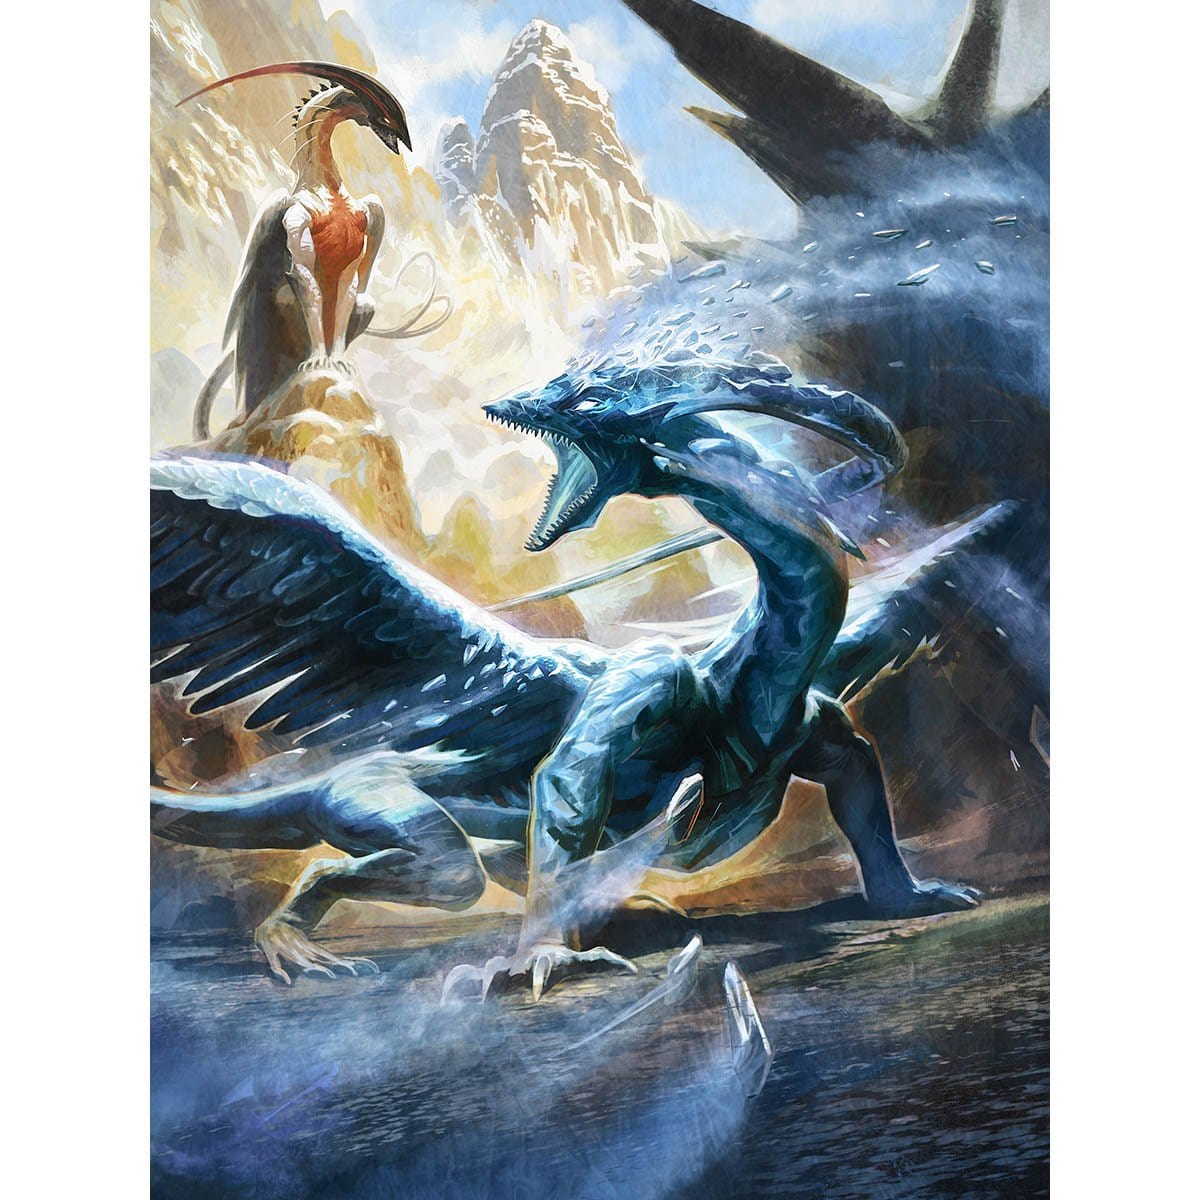 Supplant Form Print - Print - Original Magic Art - Accessories for Magic the Gathering and other card games